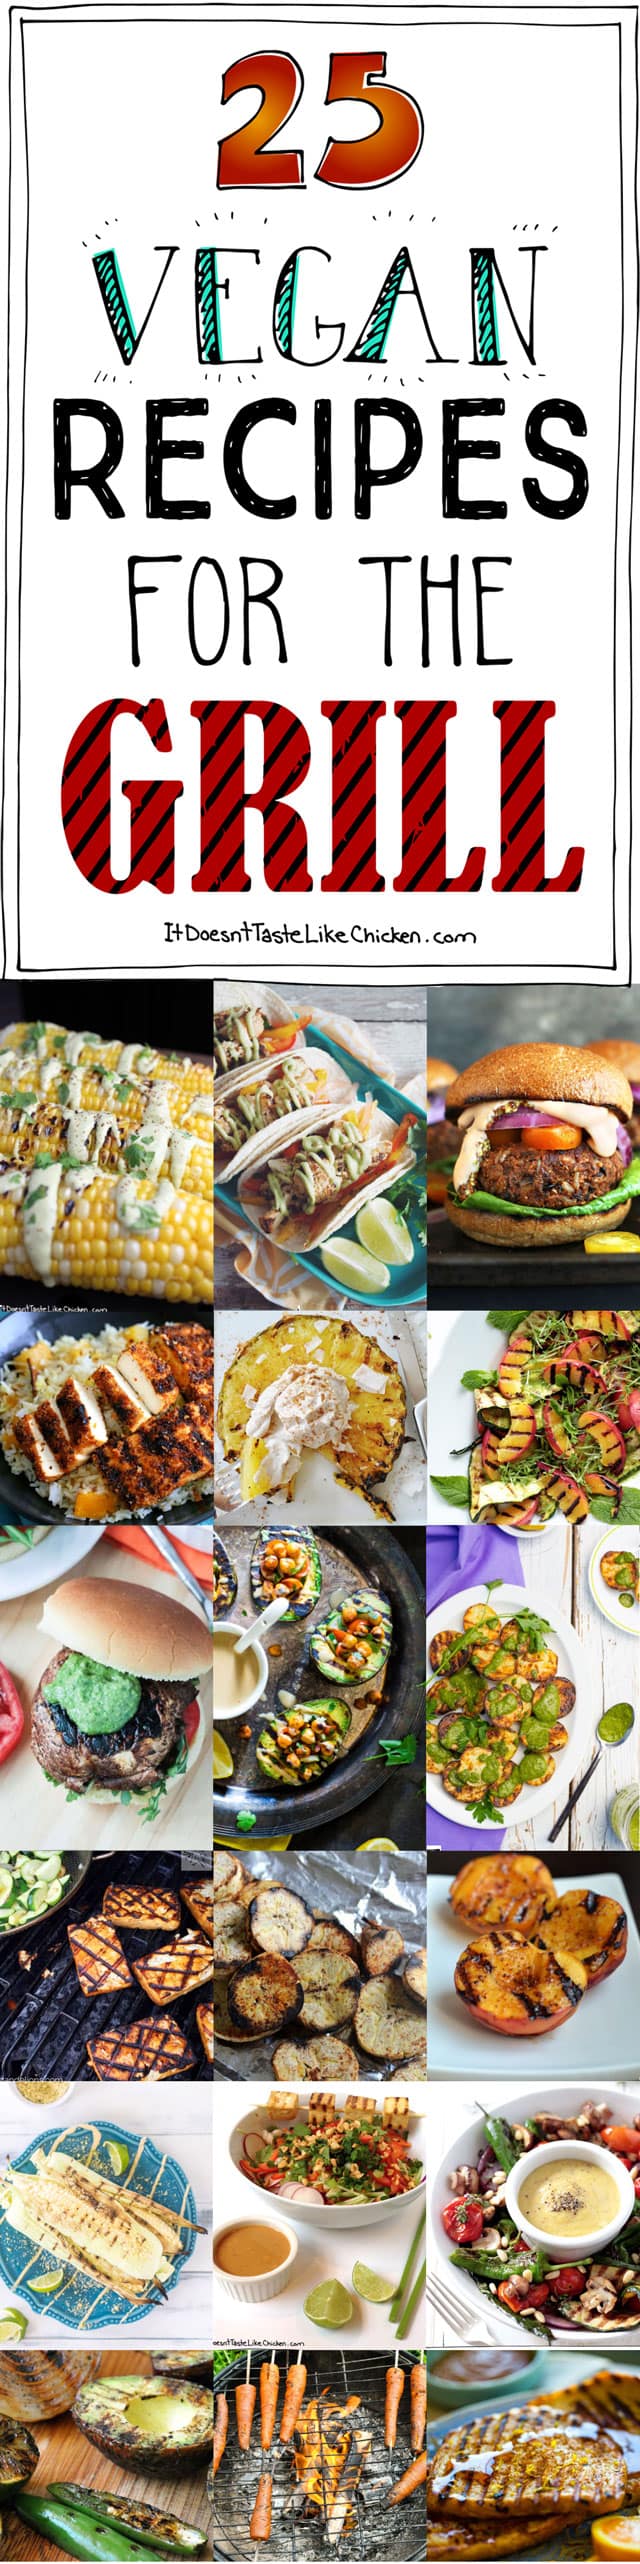 25 Vegan Recipes for the Grill! A collection of grillable vegan recipes that are perfect for your next BBQ! Breakfast to dessert and everything in between. #itdoesnttastelikechicken